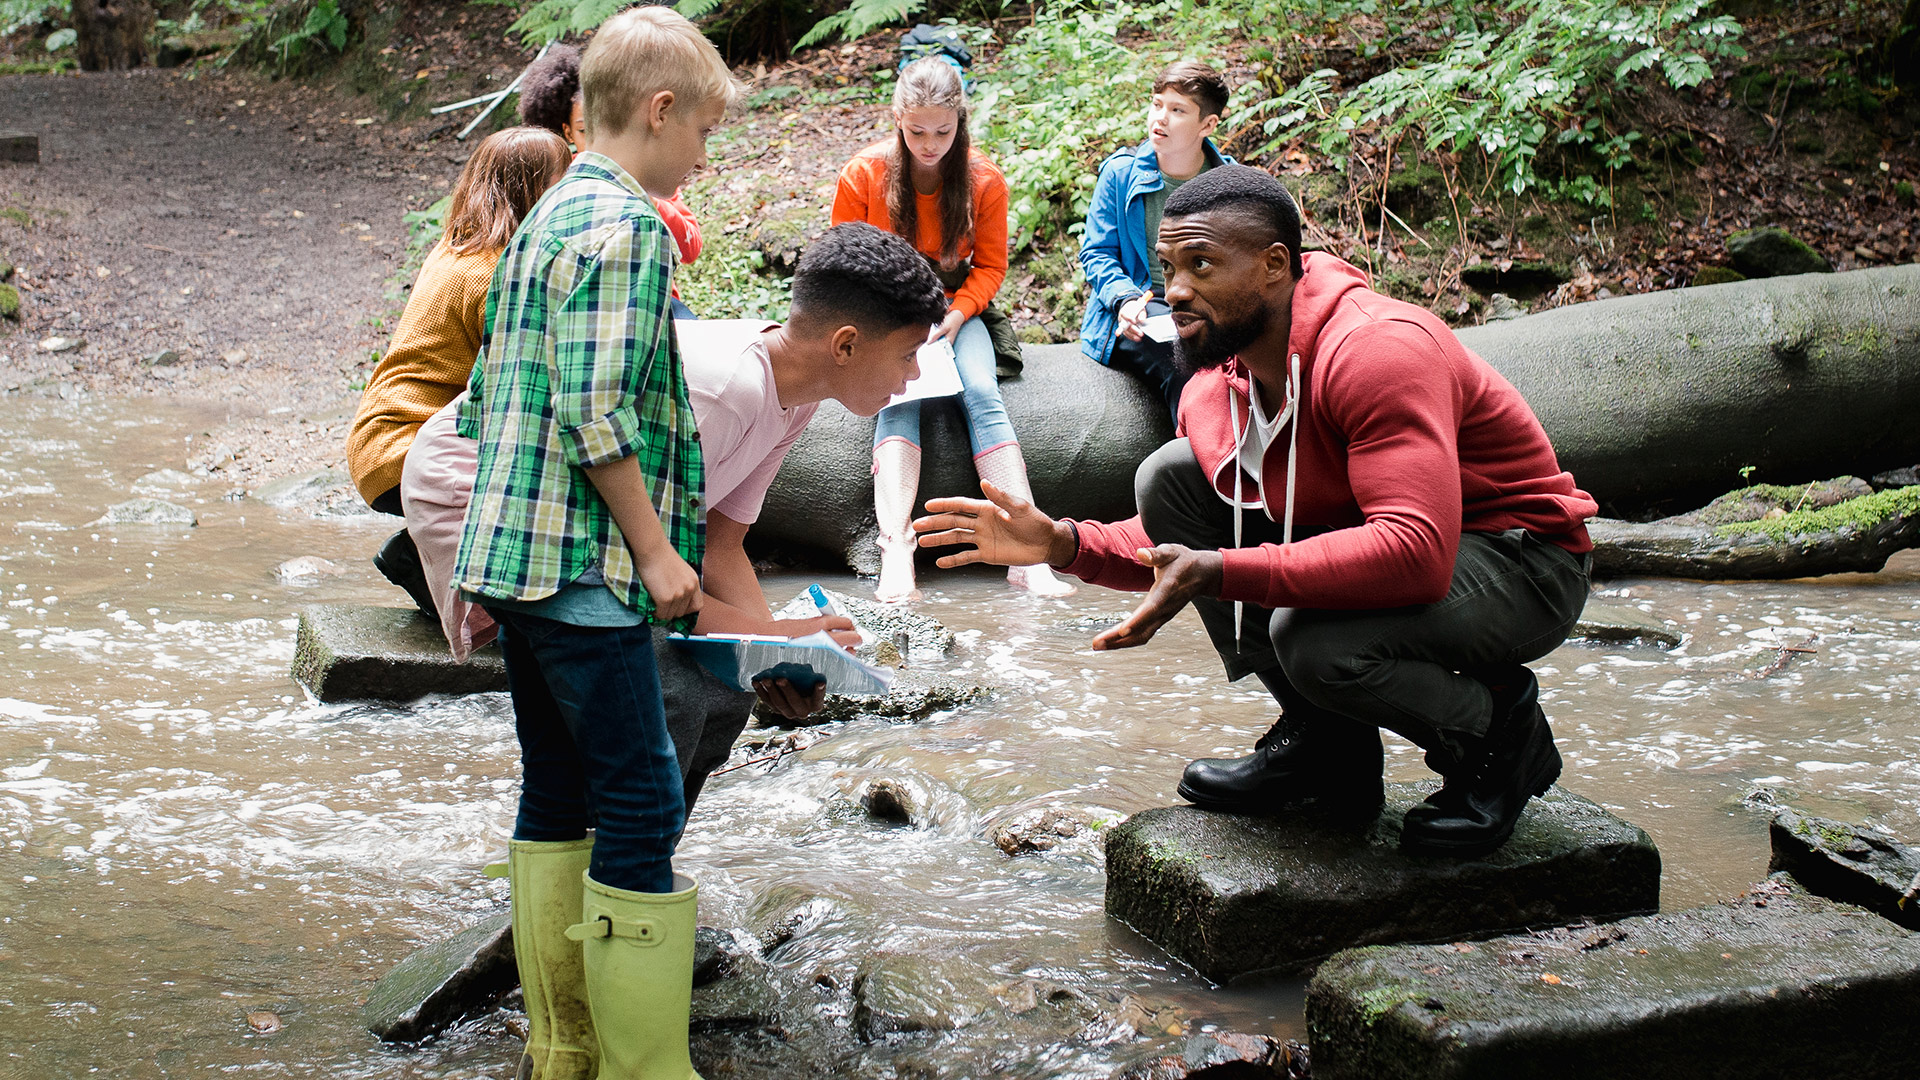 Picture at a brook in the forest, one sees children and an educator, who explains to them something, in addition the lettering "What look in the future conferences? We have suggestions!"